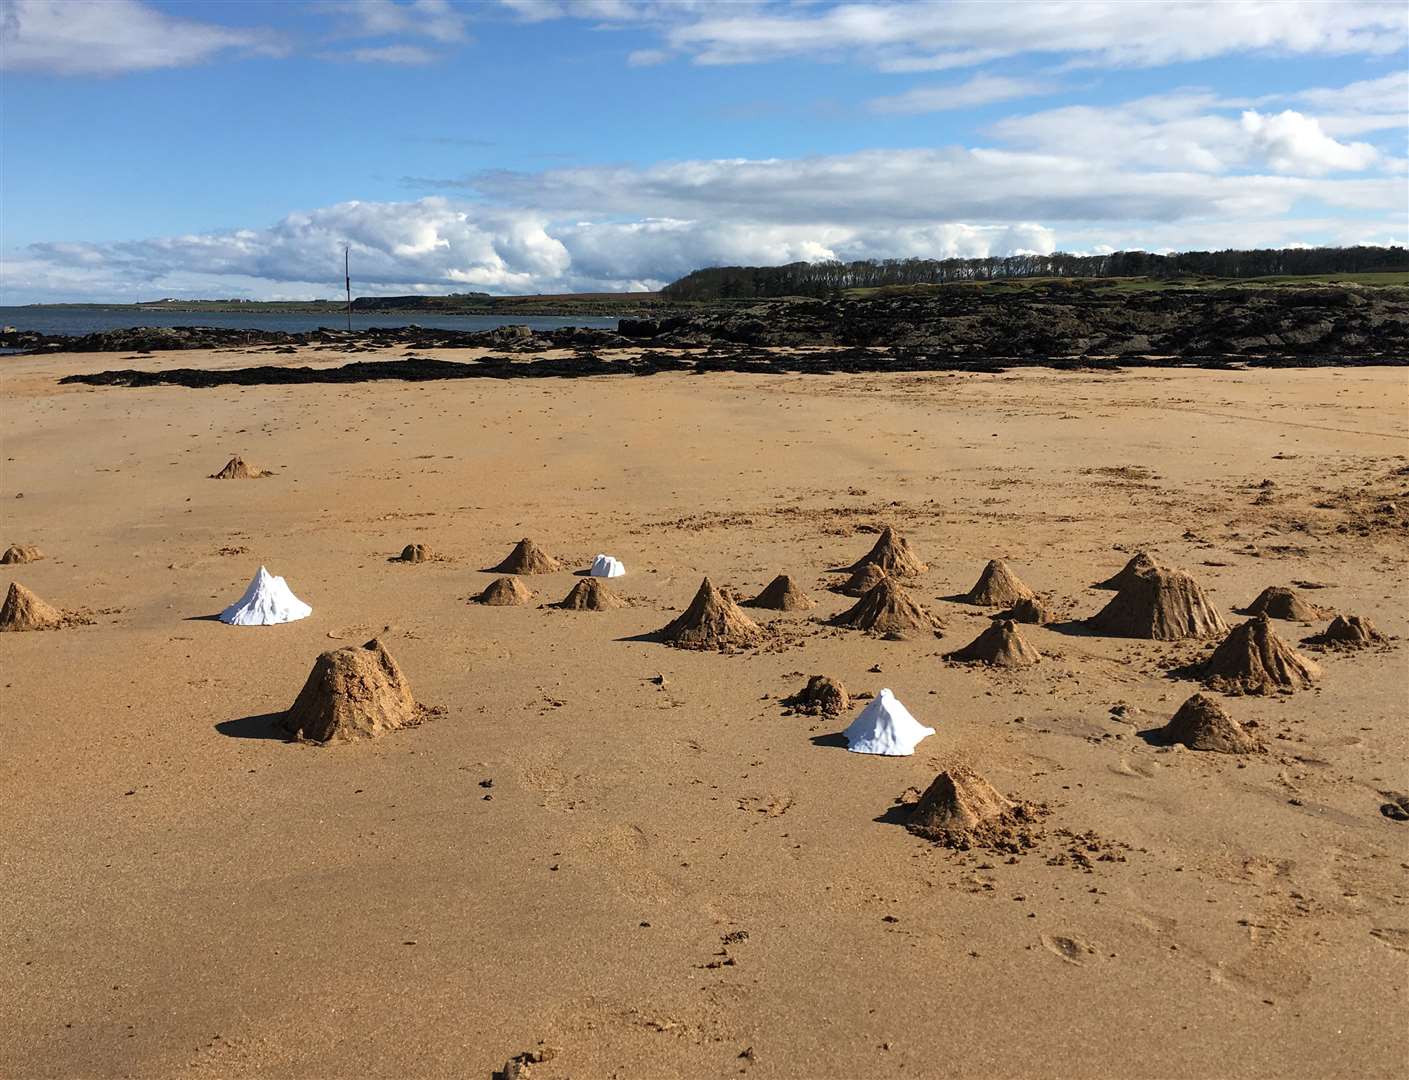 The sand project will be staged on Leysdown beach